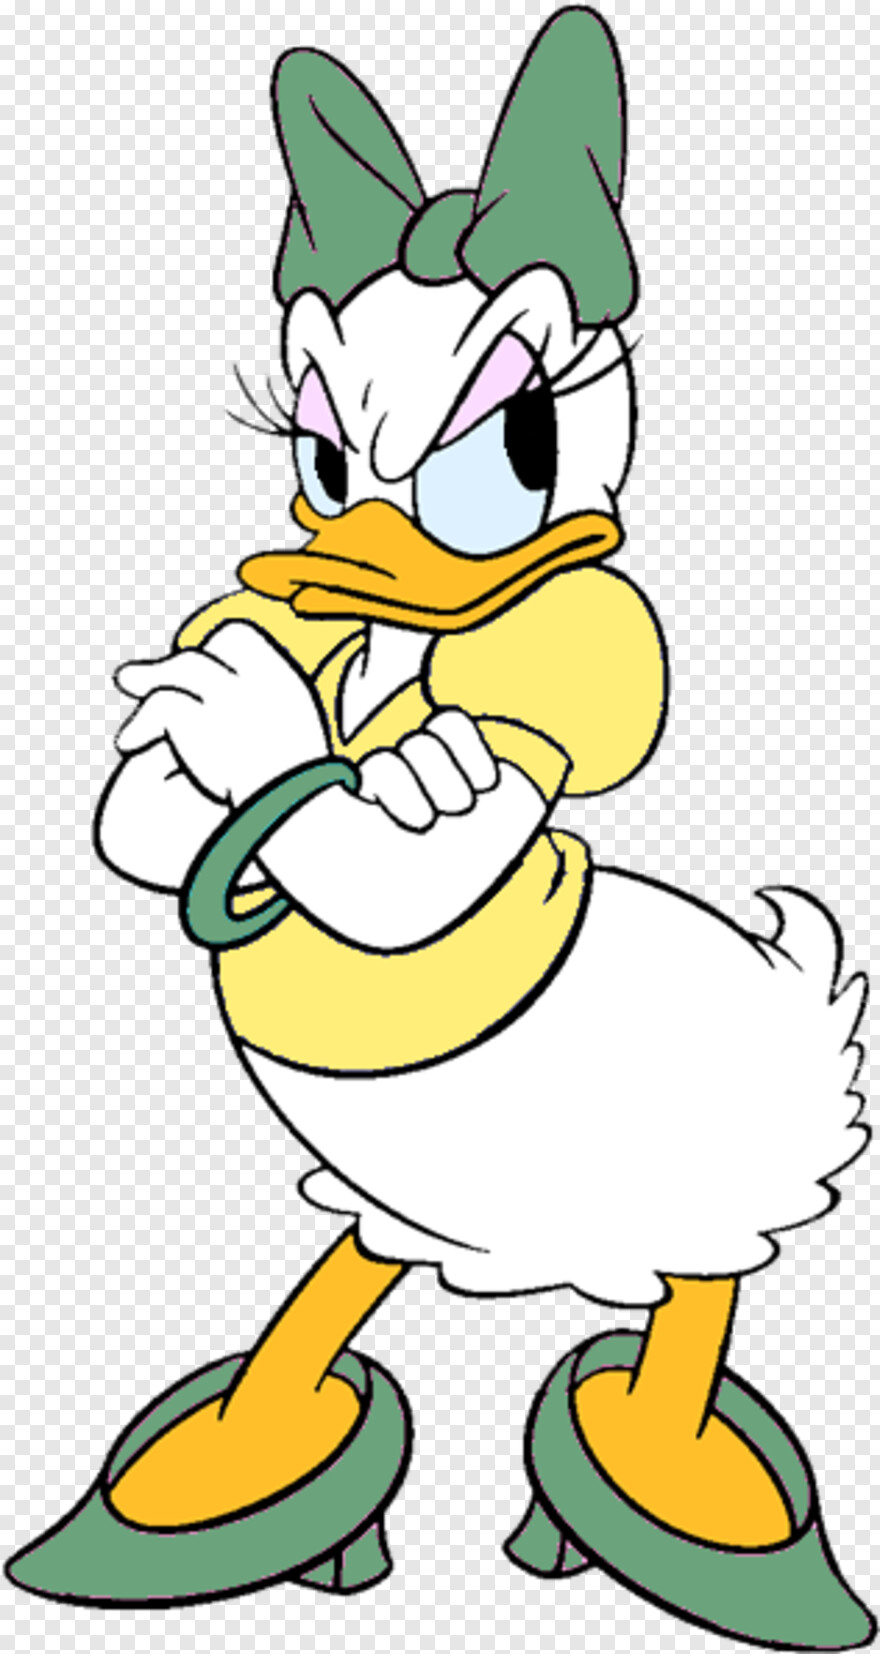 Angry daisy duck